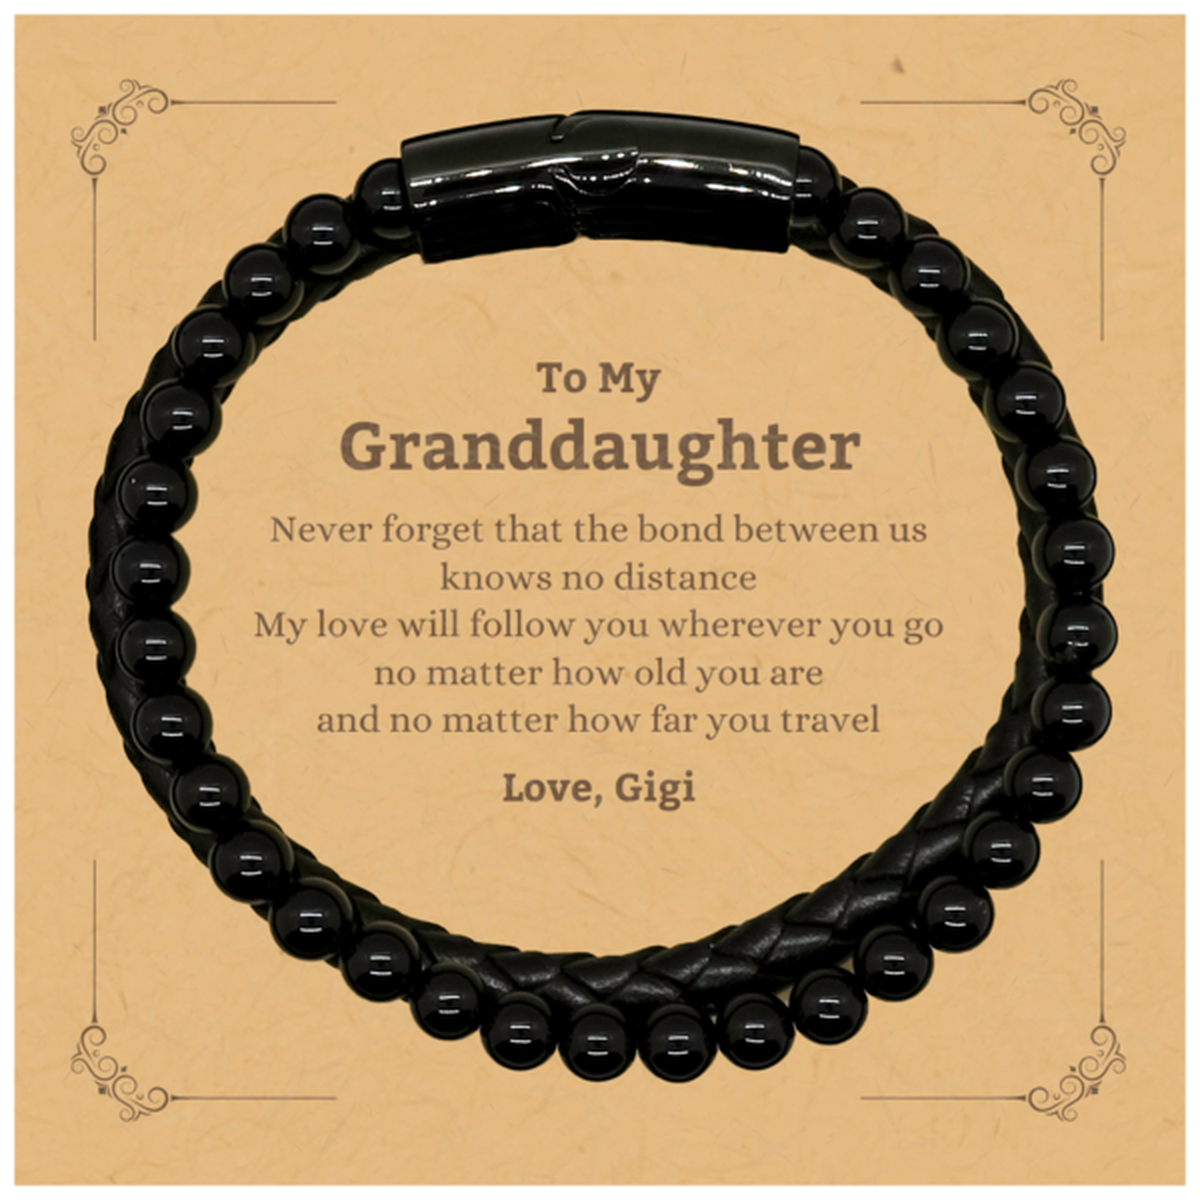 Granddaughter Birthday Gifts from Gigi, Adjustable Stone Leather Bracelets for Granddaughter Christmas Graduation Unique Gifts Granddaughter Never forget that the bond between us knows no distance. Love, Gigi